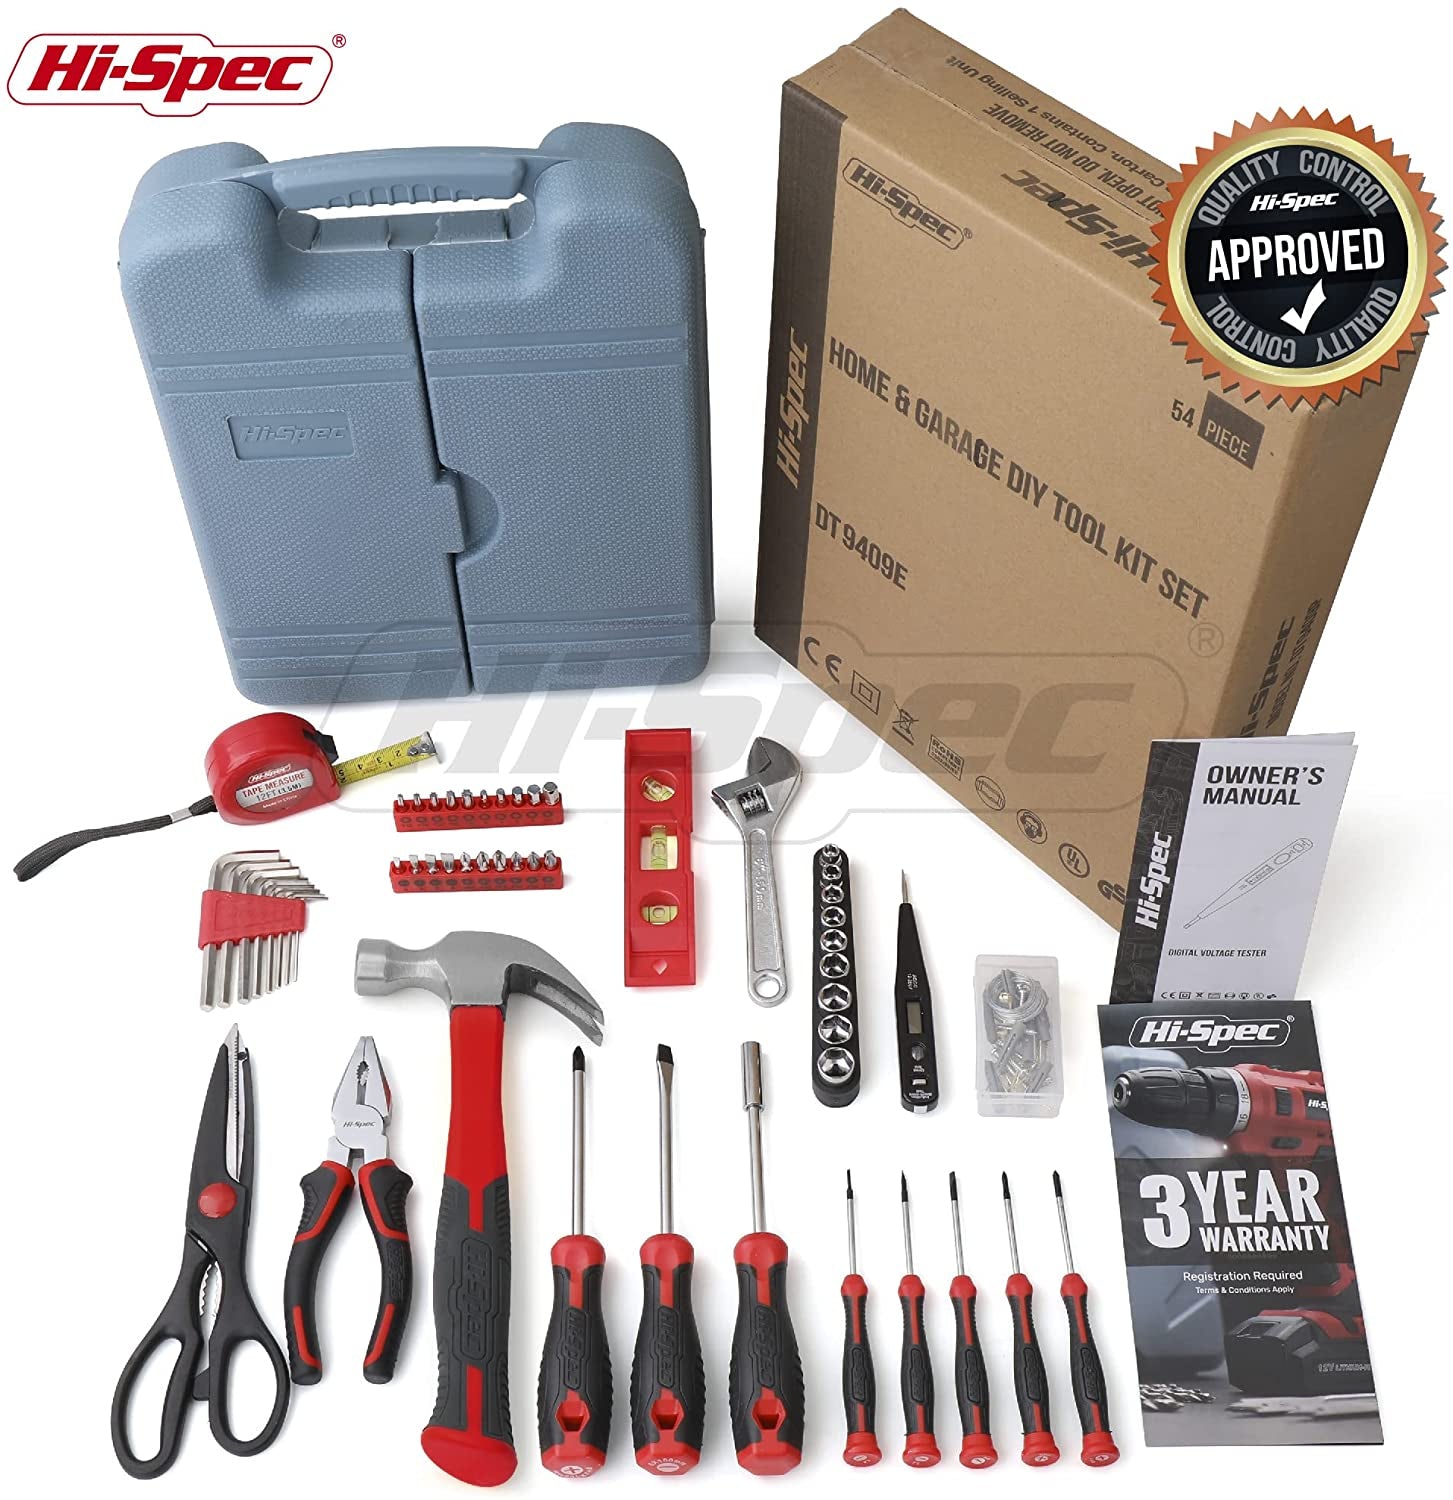 54 Piece Red Home & Office Tool Kit Set. General DIY Repair & Maintenance Hand Tools with Hammer, Pliers, Screwdriver & Hex Key Sets. Complete in a Storage Box Carry Case